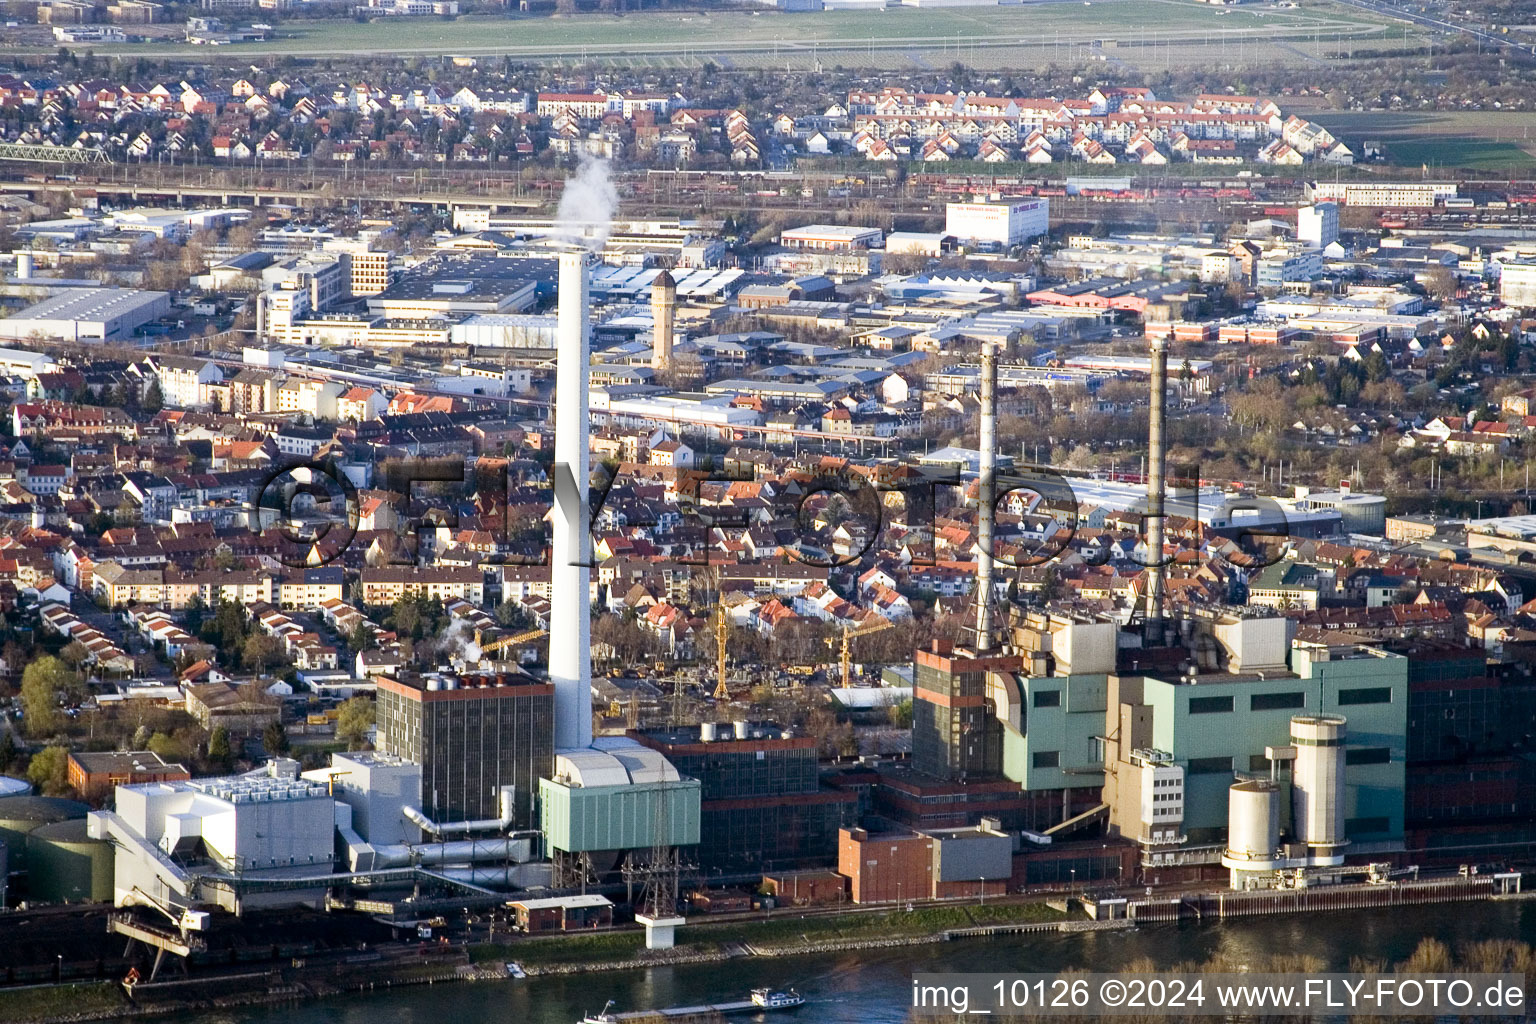 Aerial view of GKM from the south in the district Neckarau in Mannheim in the state Baden-Wuerttemberg, Germany